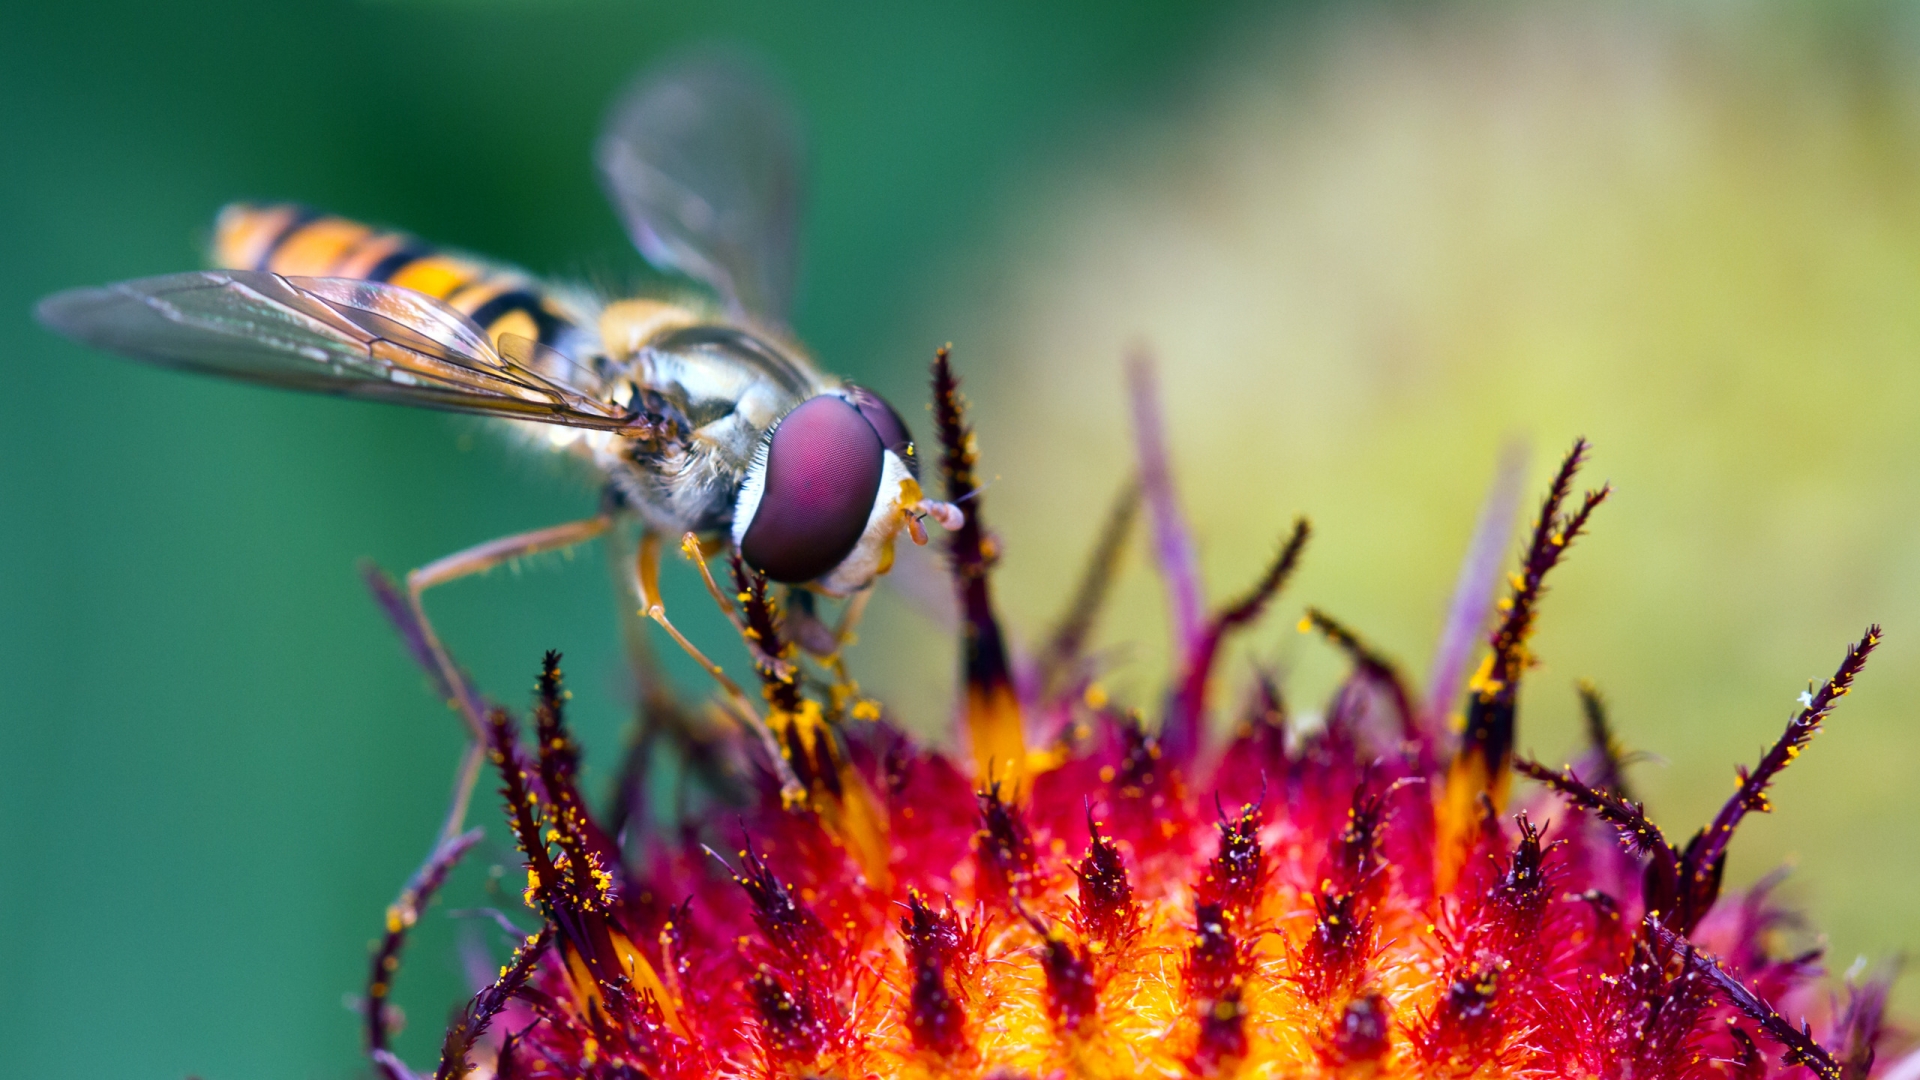 Hover Fly at Work for 1920 x 1080 HDTV 1080p resolution